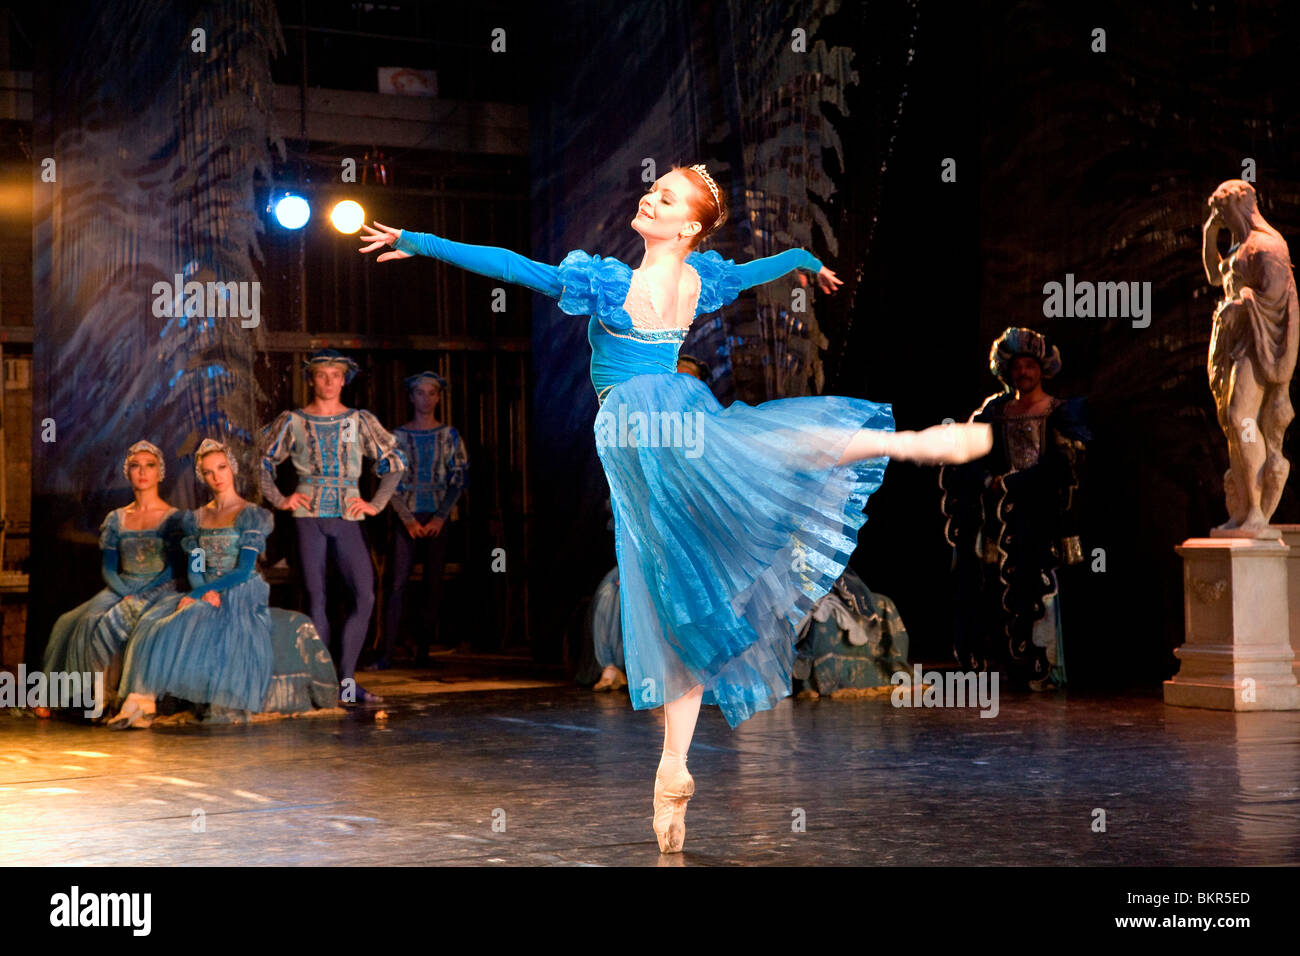 Russia, St.Petersburg; A ballet dancer doing a pirouette in her solo piece during Tchaikovsky's 'Swan Lake' Stock Photo